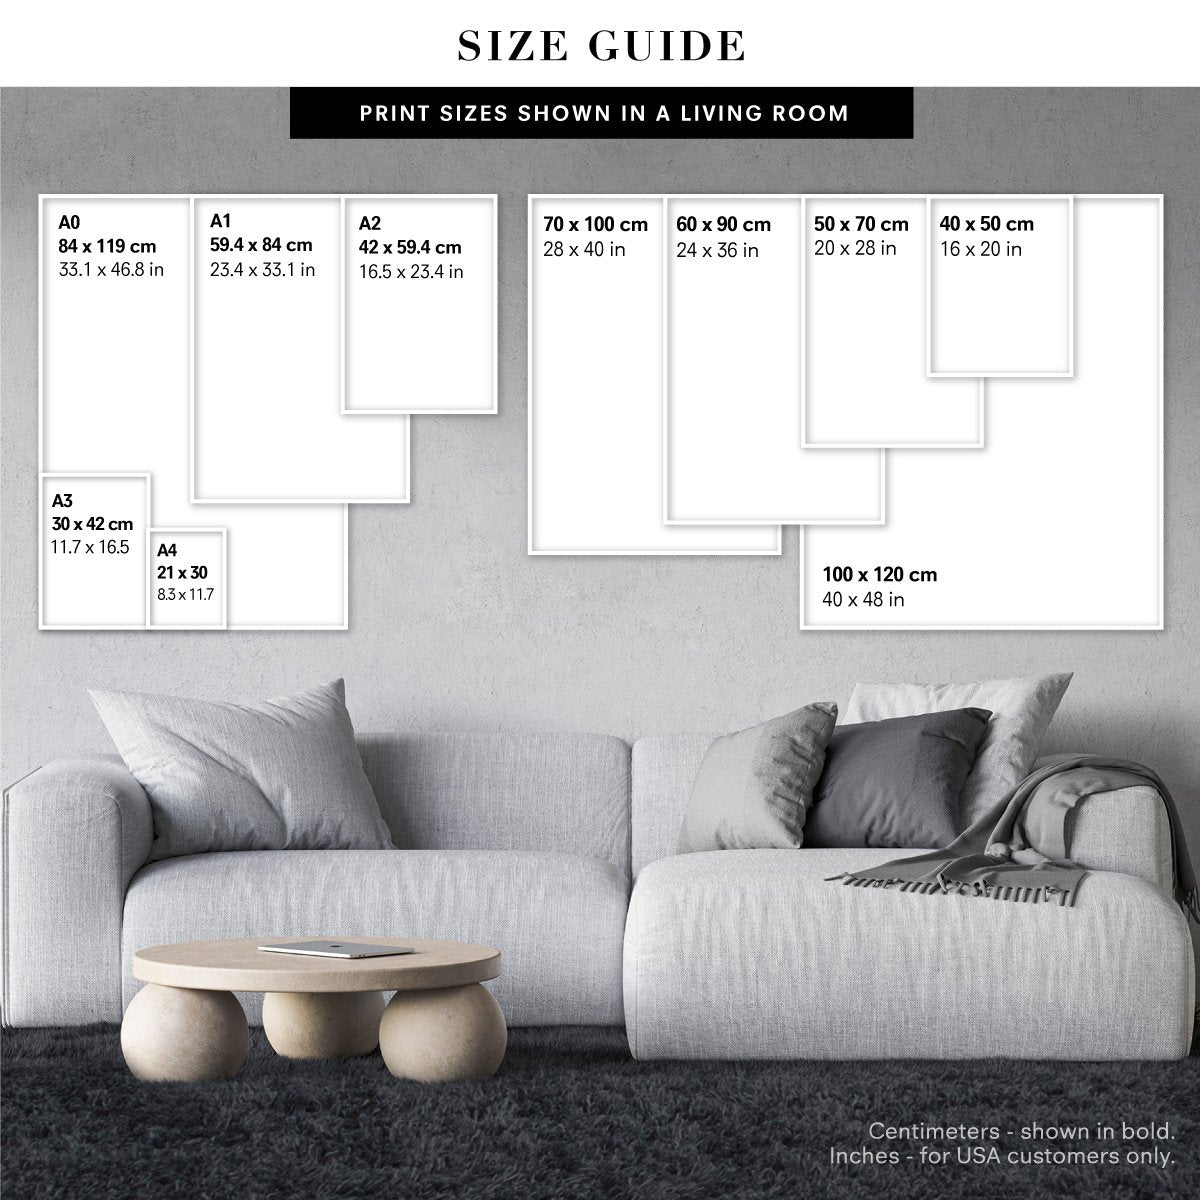 Print and Proper | Print Size Guide to help decide which size to select